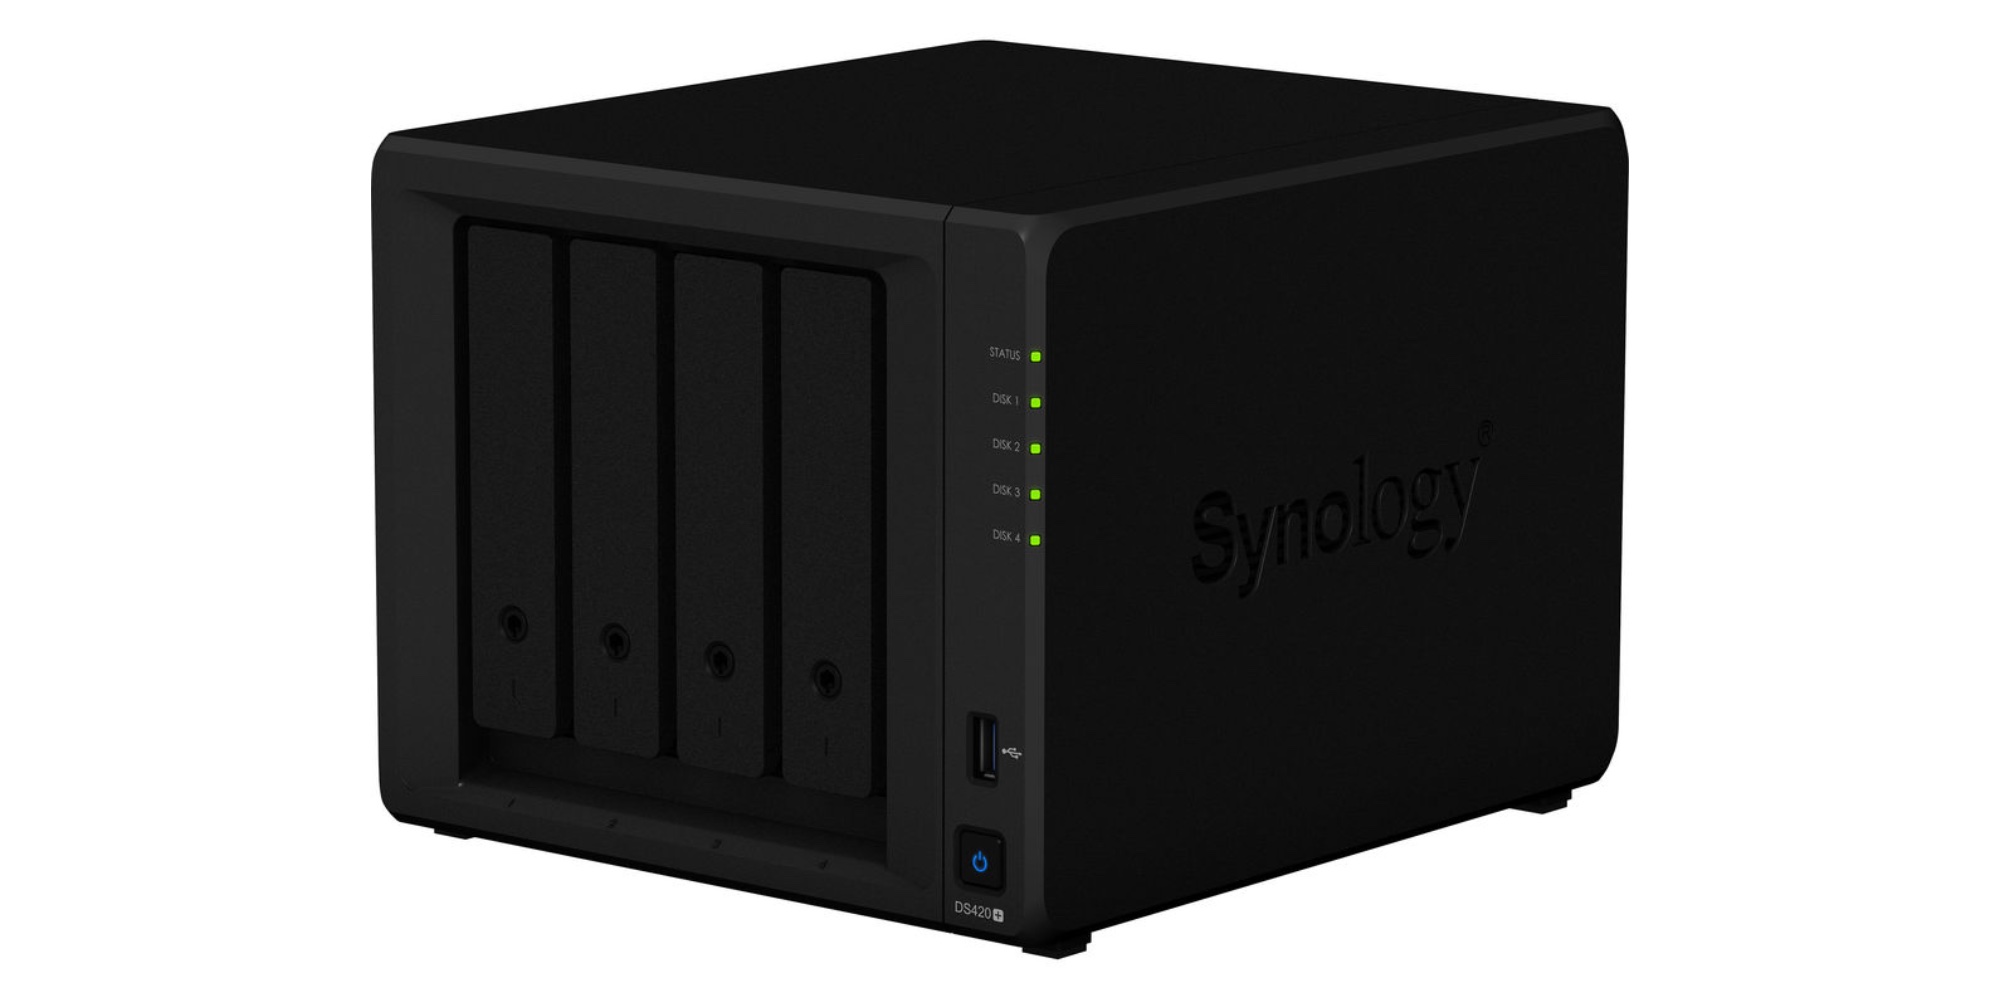 Synology's DS420+ 4-bay NAS can run Plex at $400 (Save $100), plus